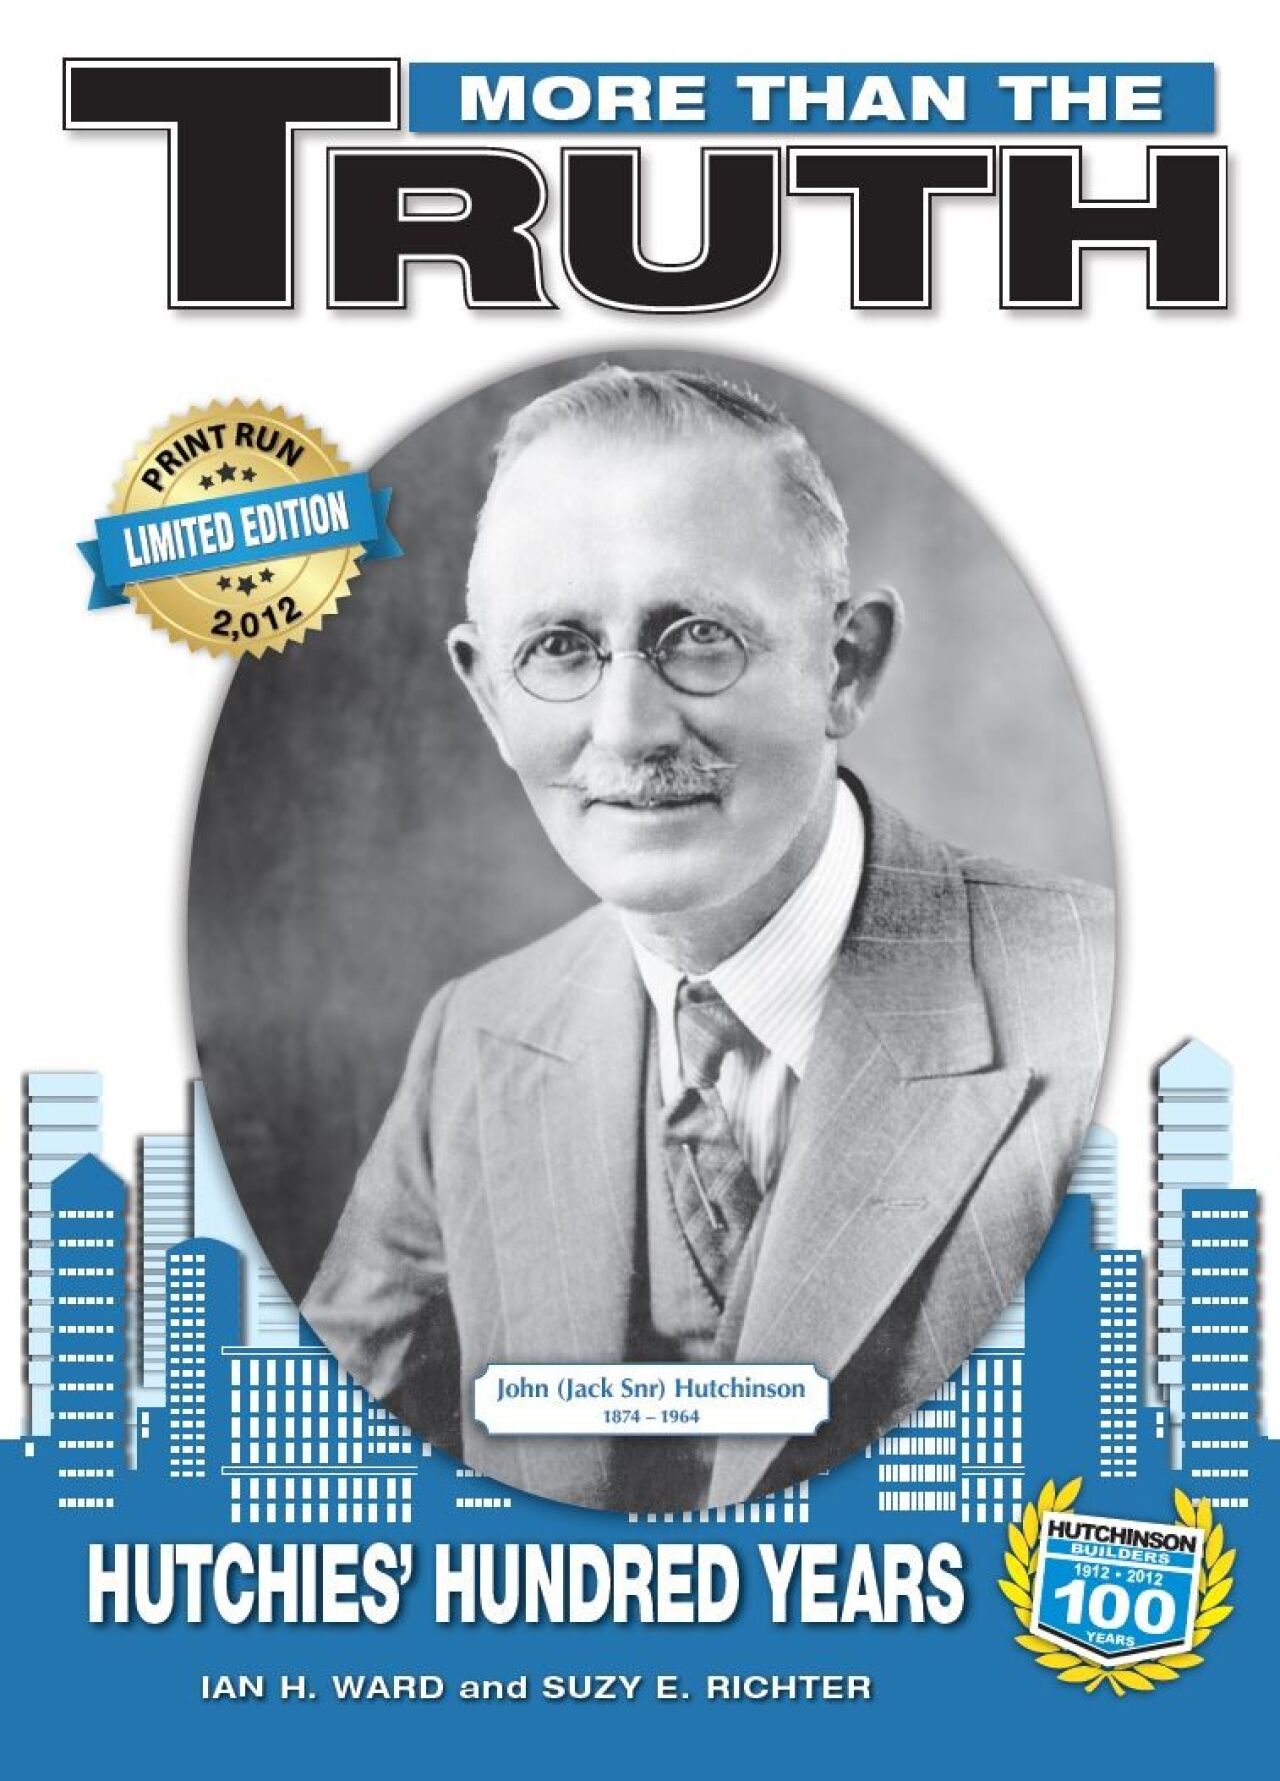 More Than The Truth: Hutchies' Hundred Years